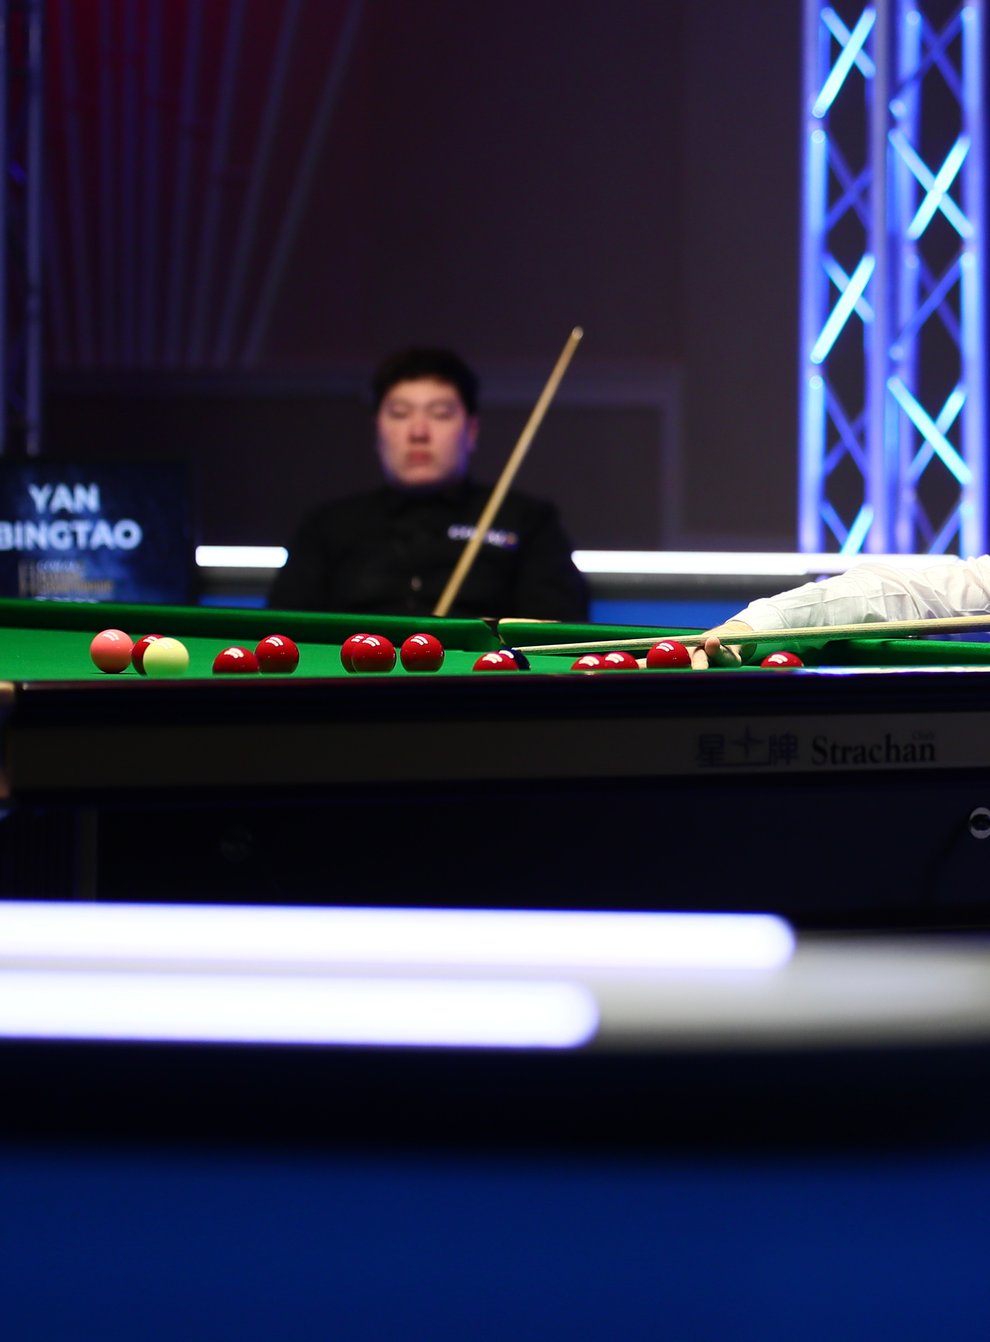 World champion Judd Trump will be among the players returning to the table from the beginnning of June